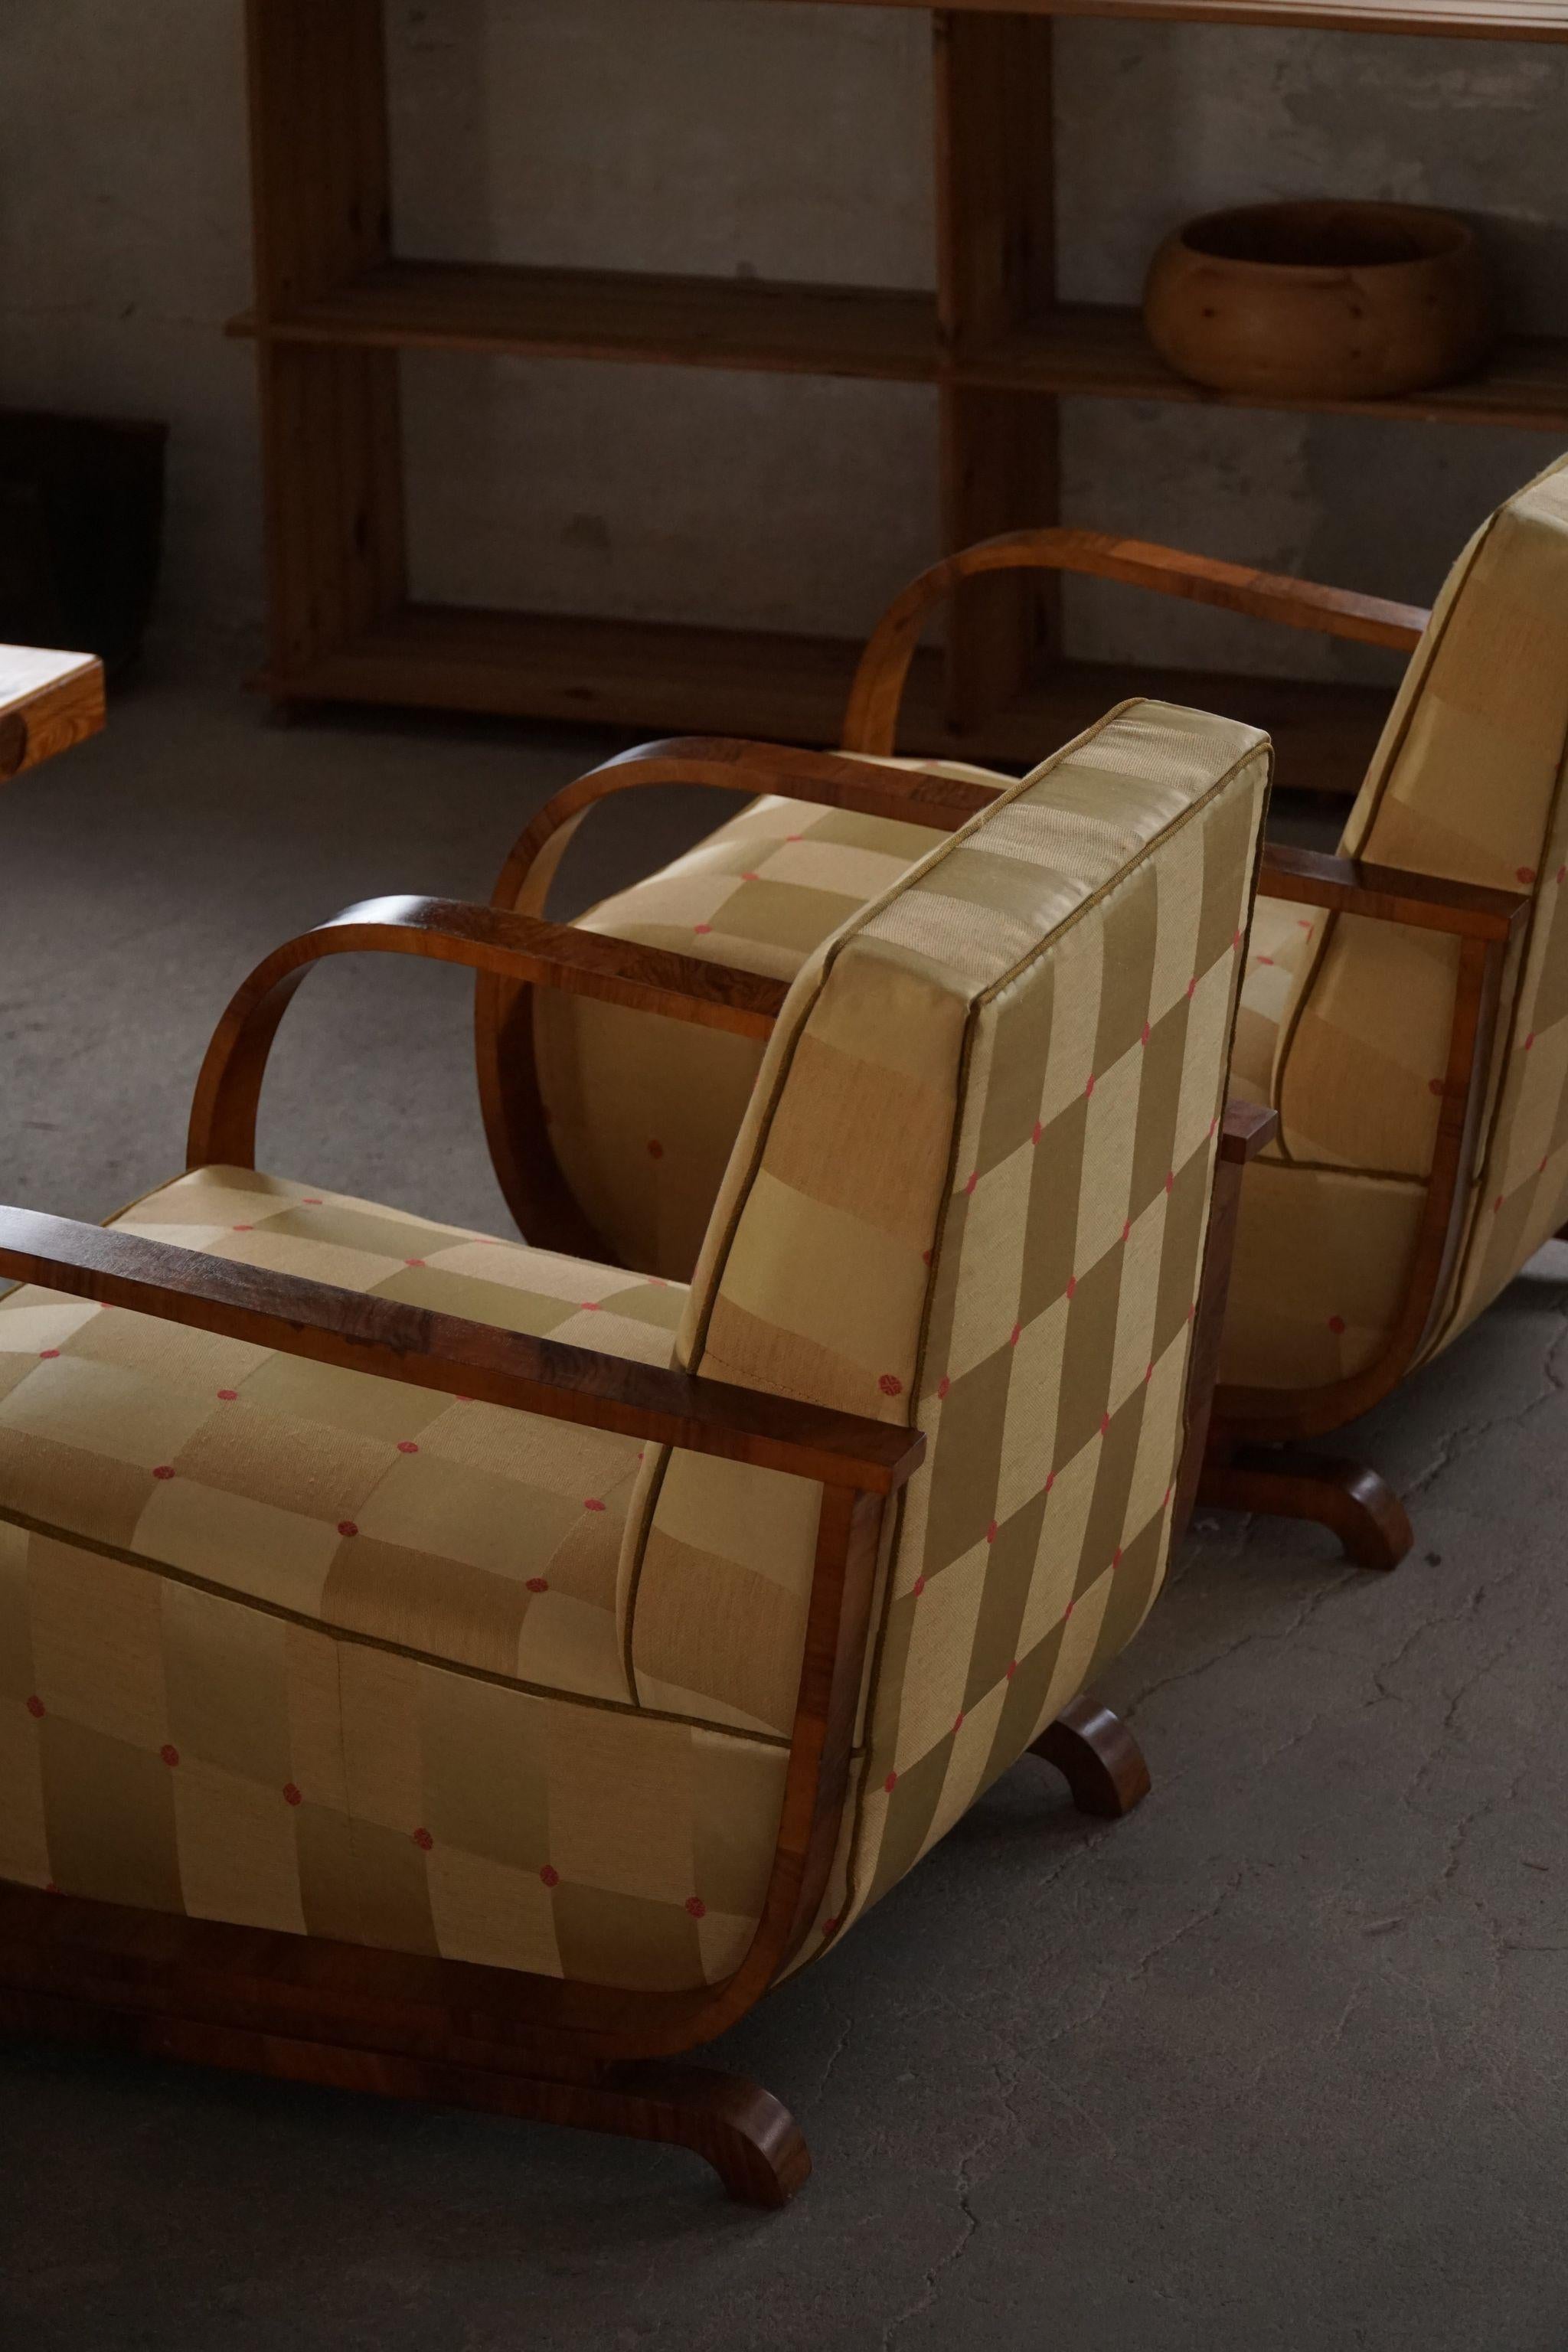 Pair of curved Art Deco lounge chairs, with armrest in walnut, made in 1930s by a Danish cabinetmaker. Beautiful wood grains that complementary these glamorous chairs. 

The overall impression of these vintage chairs are really good.

